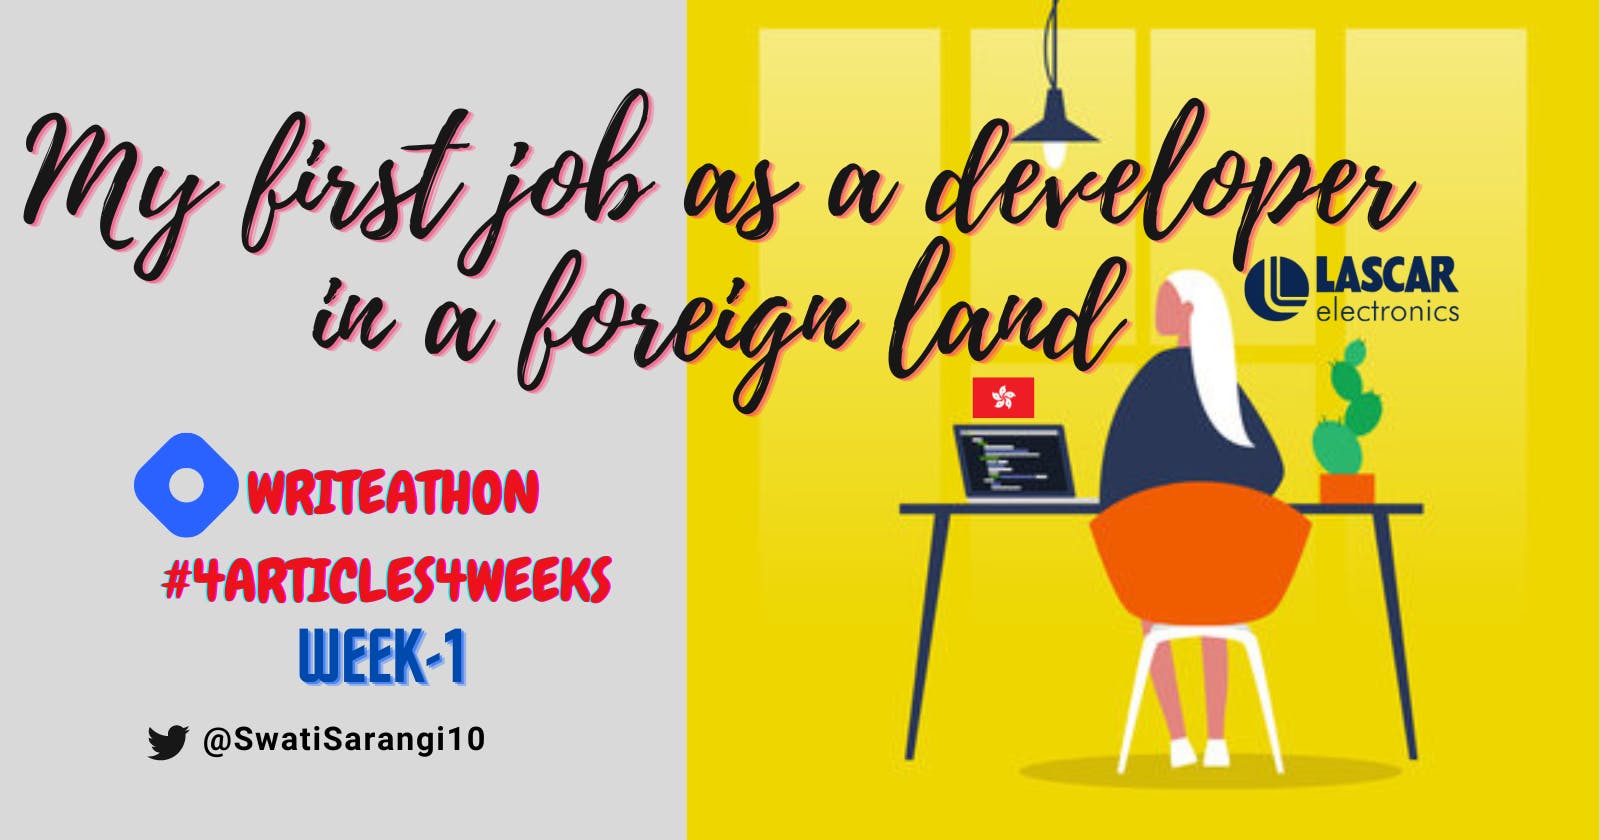 My first job as a developer in a foreign land